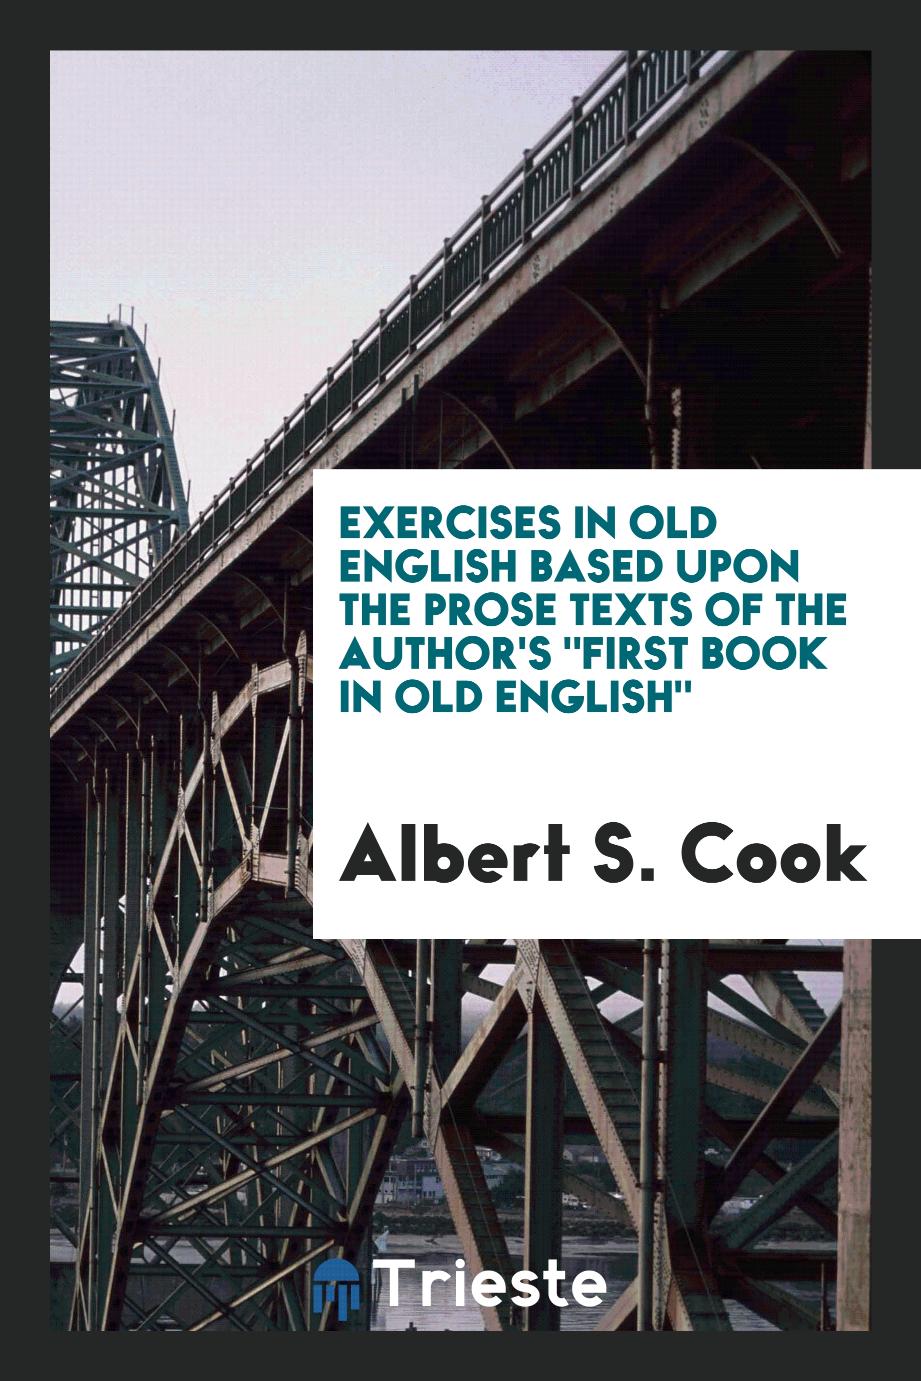 Exercises in Old English Based Upon the Prose Texts of the Author's "First Book in Old English"